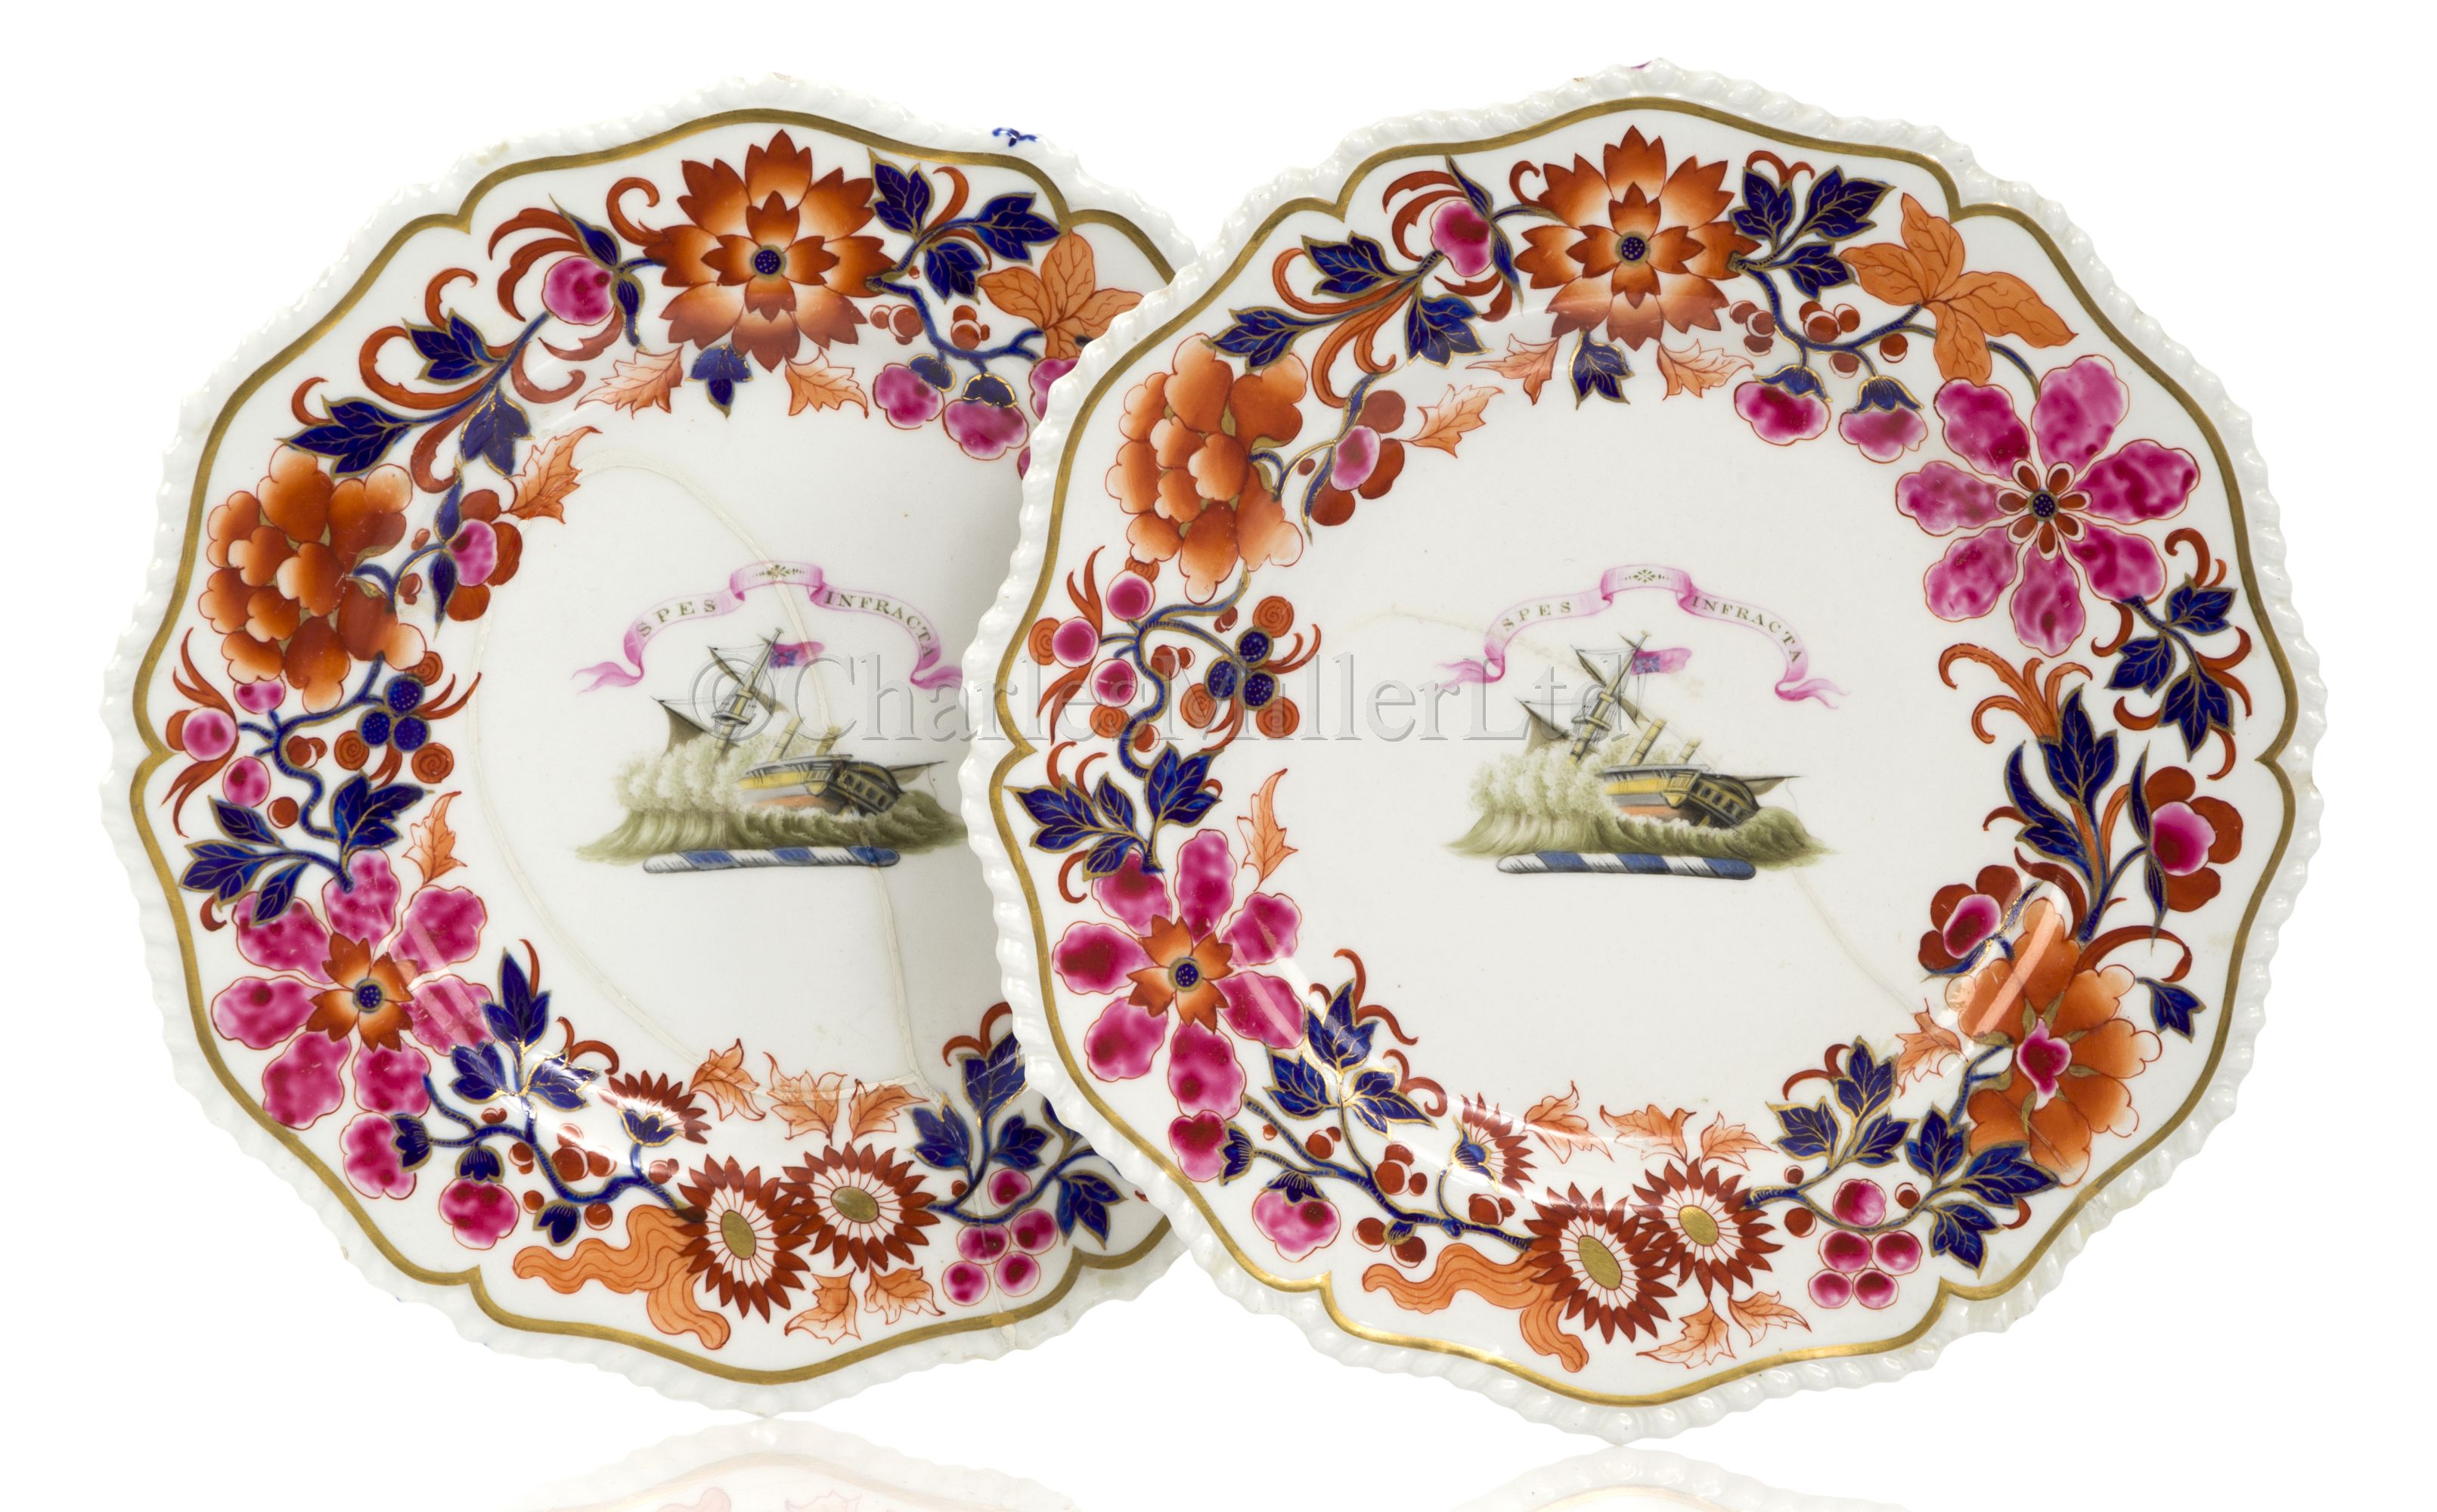 A PAIR OF ARMORIAL PLATES FOR THE DICK-CONYNGHAM FAMILY, BY FLIGHT, BARR & BARR, WORCESTER, CIRCA